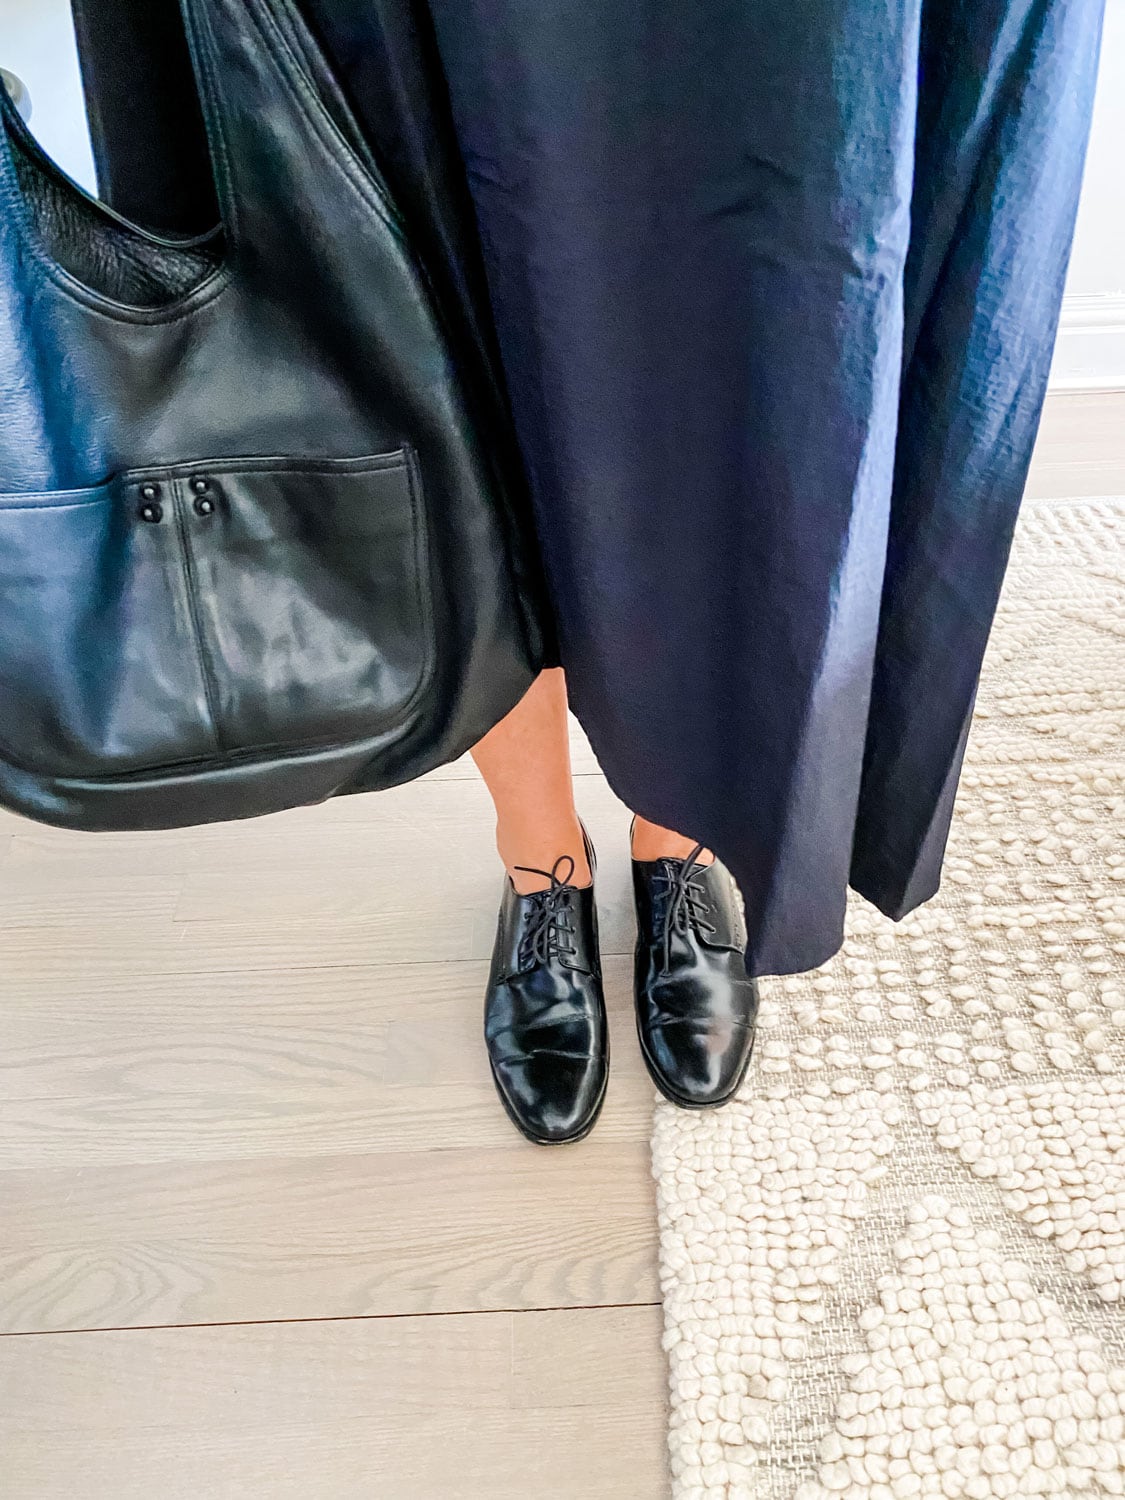 The best black dress for travel + 3 ways to wear | Most Lovely Things